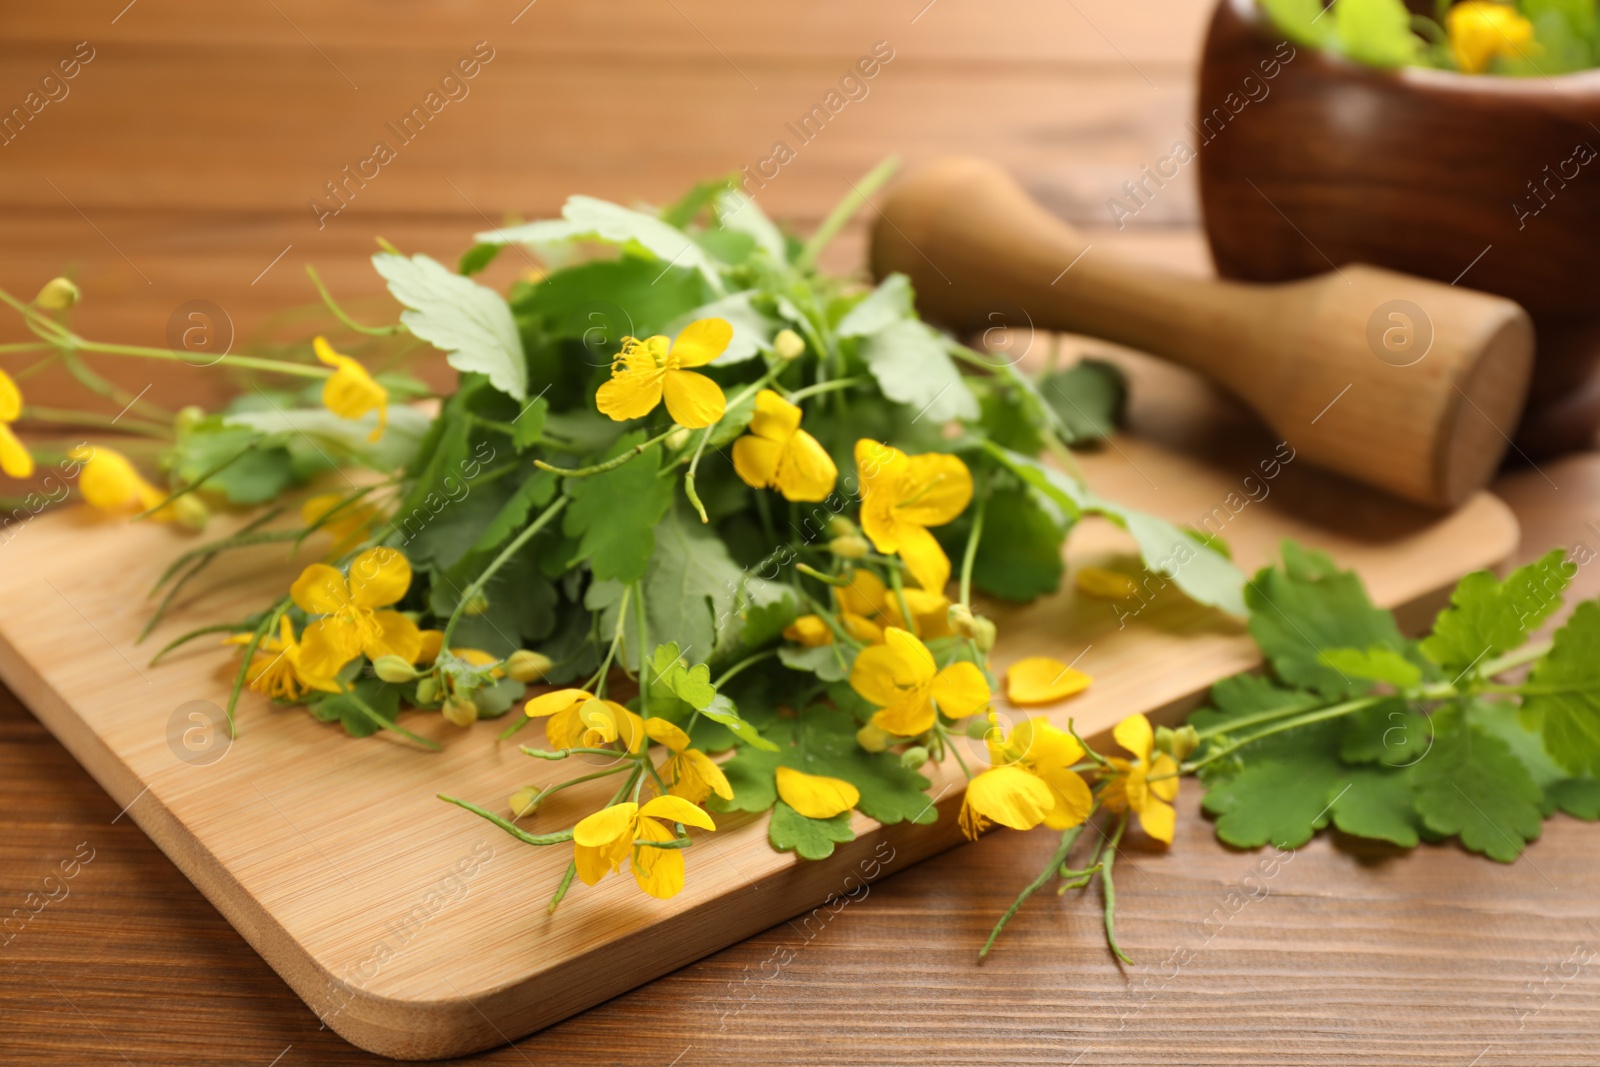 Photo of Celandine and board on wooden table, closeup